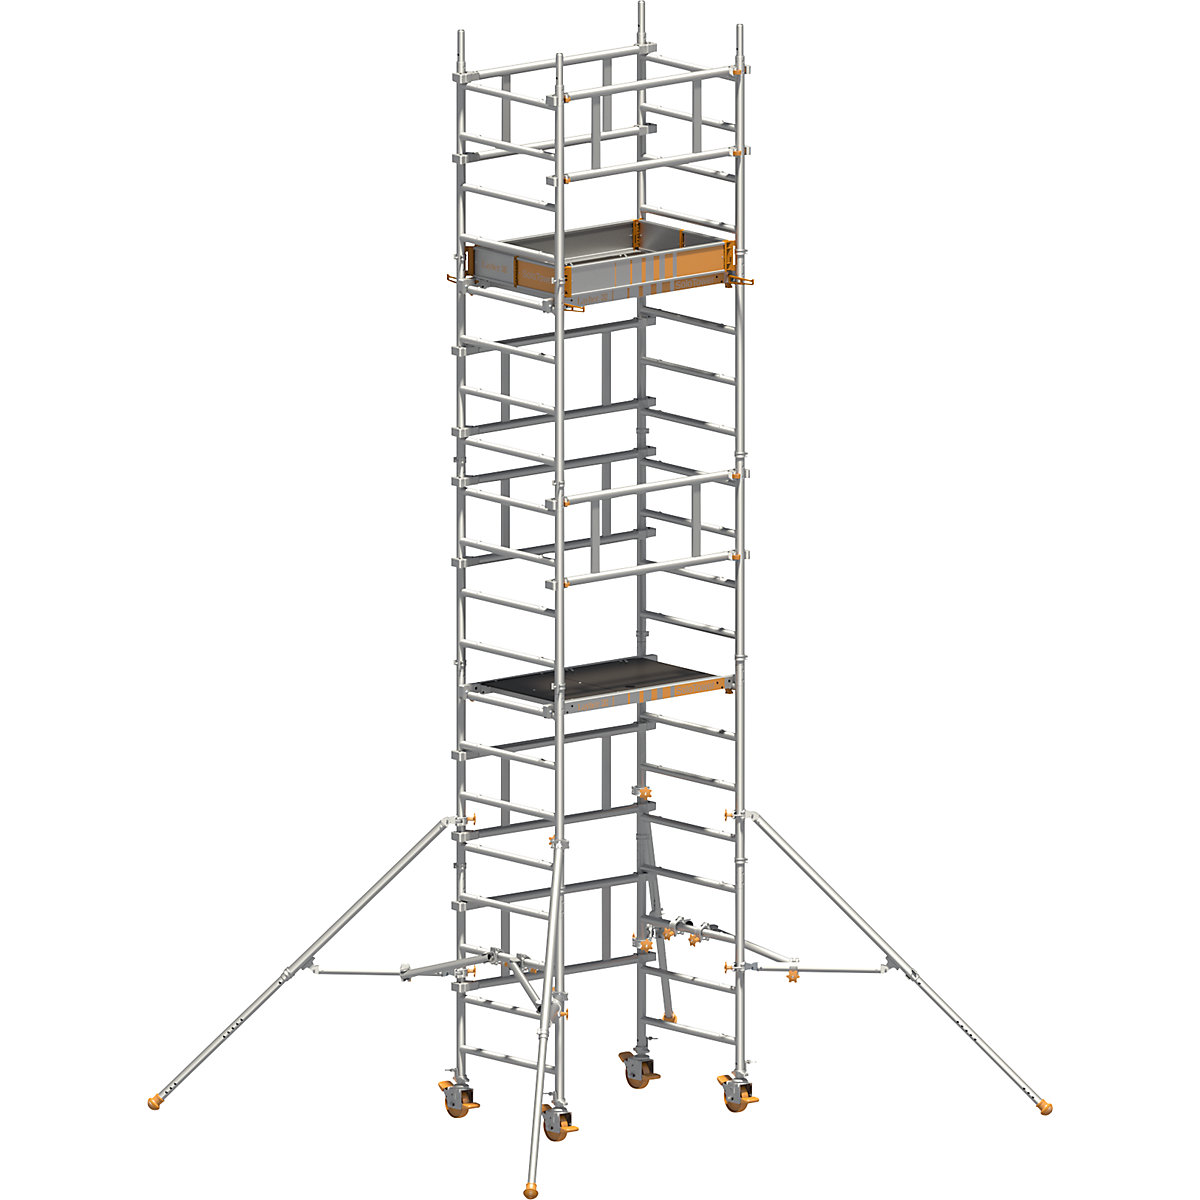 SoloTower one-person mobile access tower – Layher, platform size 1.15 x 0.8 m, working height 6.15 m-2